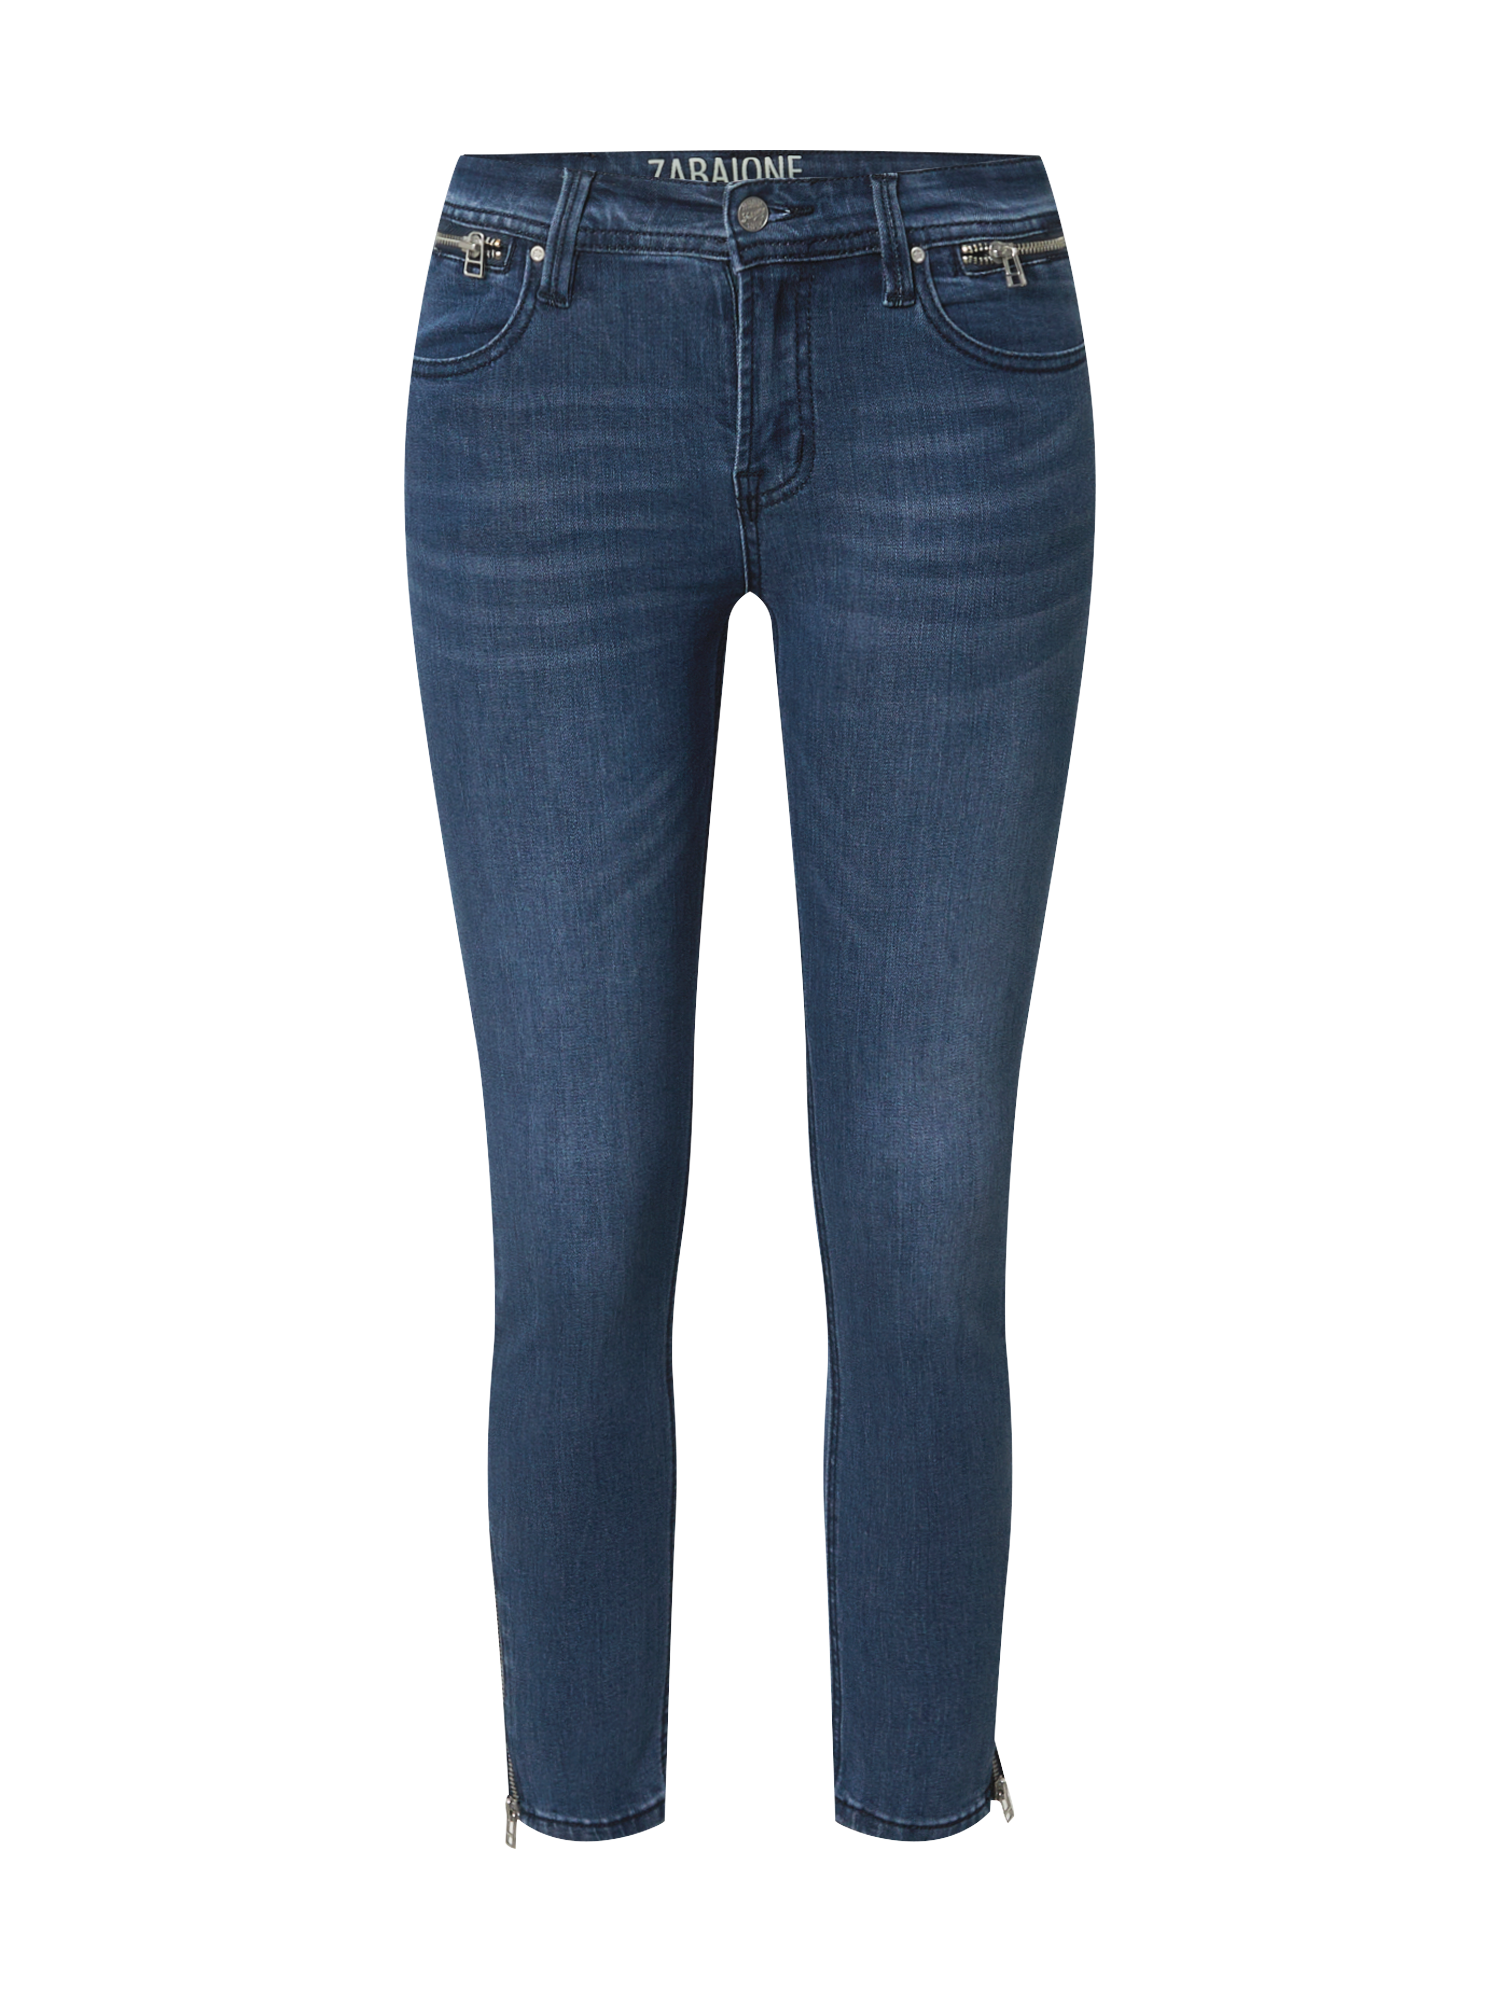 gFPmB Jeans ZABAIONE Jeans Tyra in Blu Scuro 